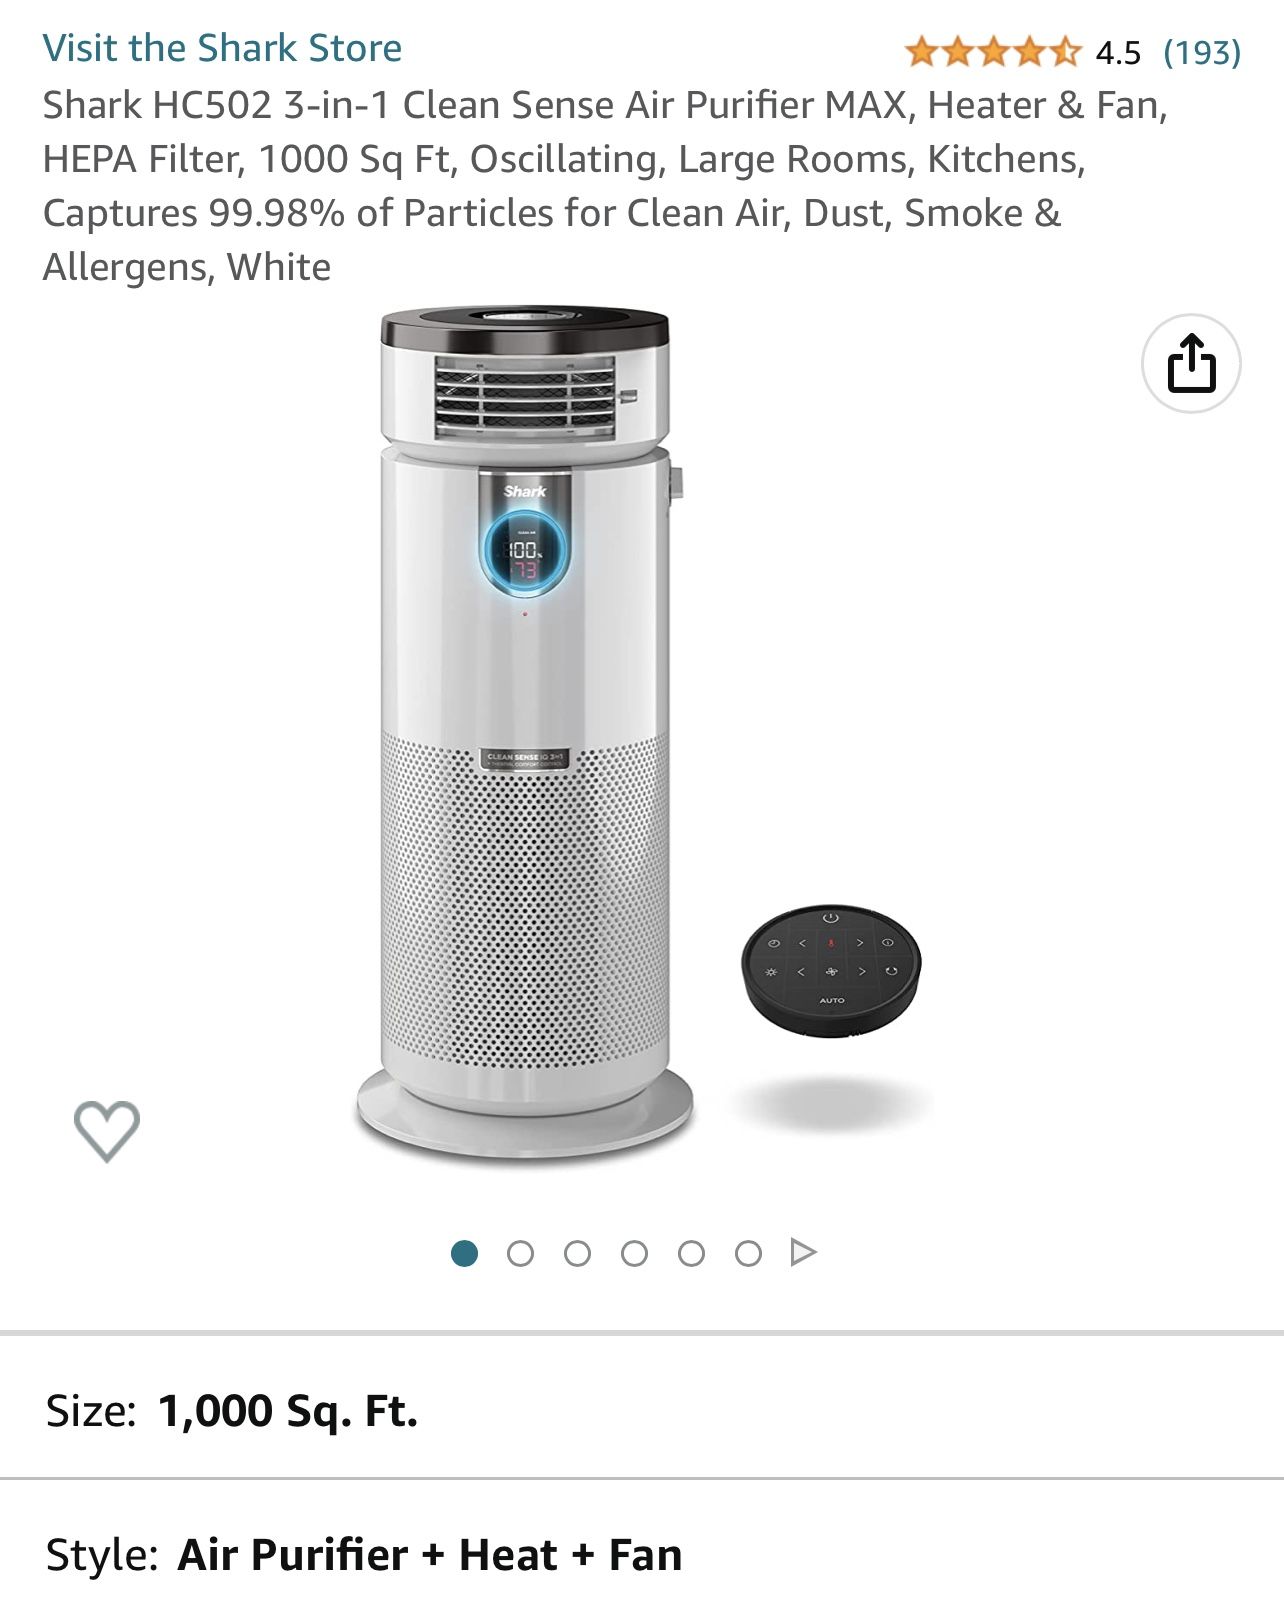 Shark HC502 3-in-1 Clean Sense Air Purifier MAX, Heater & Fan, HEPA Filter, 1000 Sq Ft, Oscillating, Large Rooms, Kitchens, Captures 99.98% of Particl